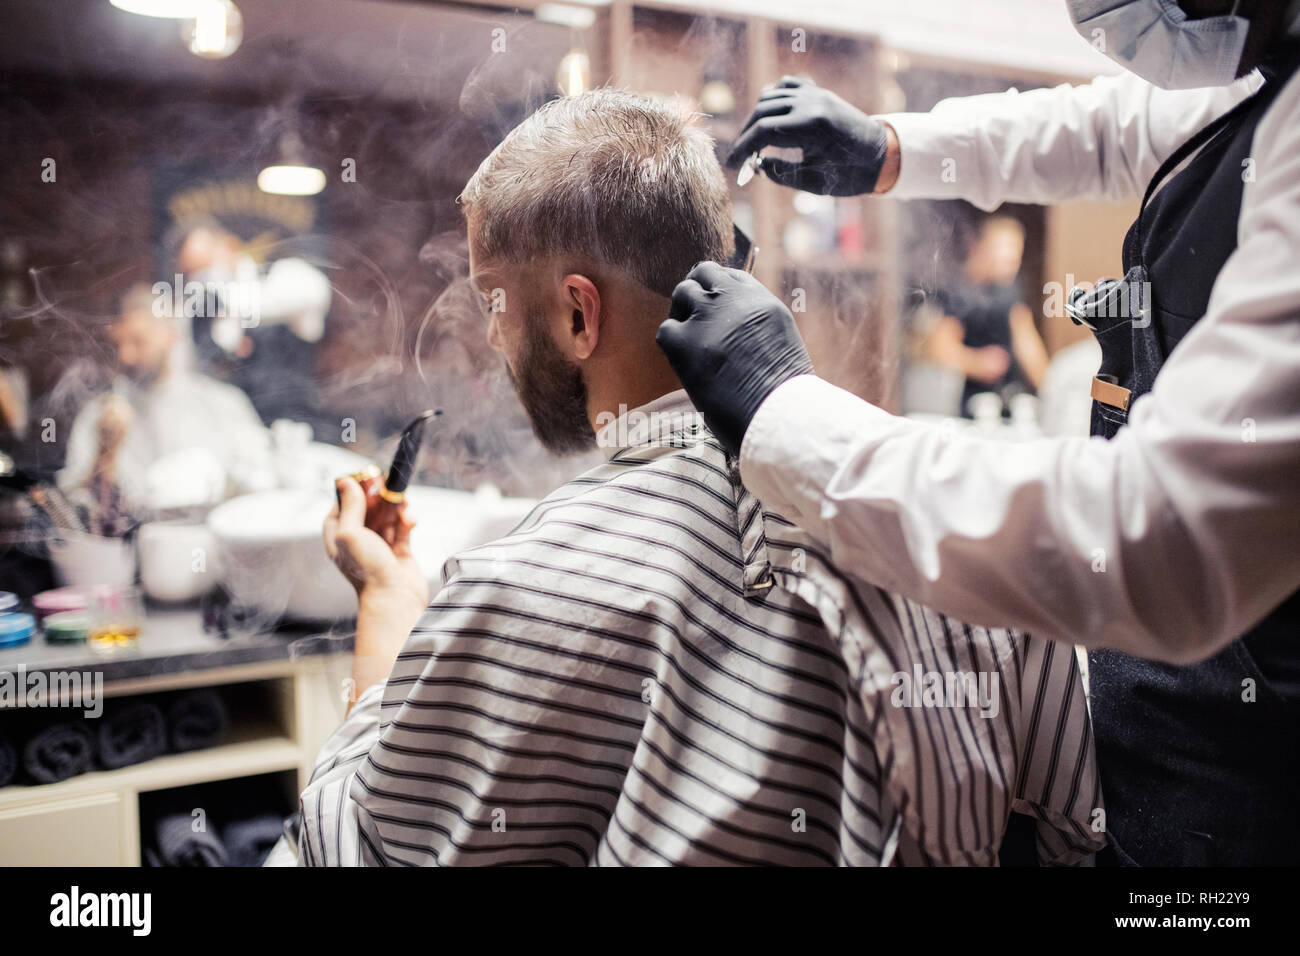 Handsome hipster man client visiting haidresser and hairstylist in barber shop, smoking a pipe. Stock Photo